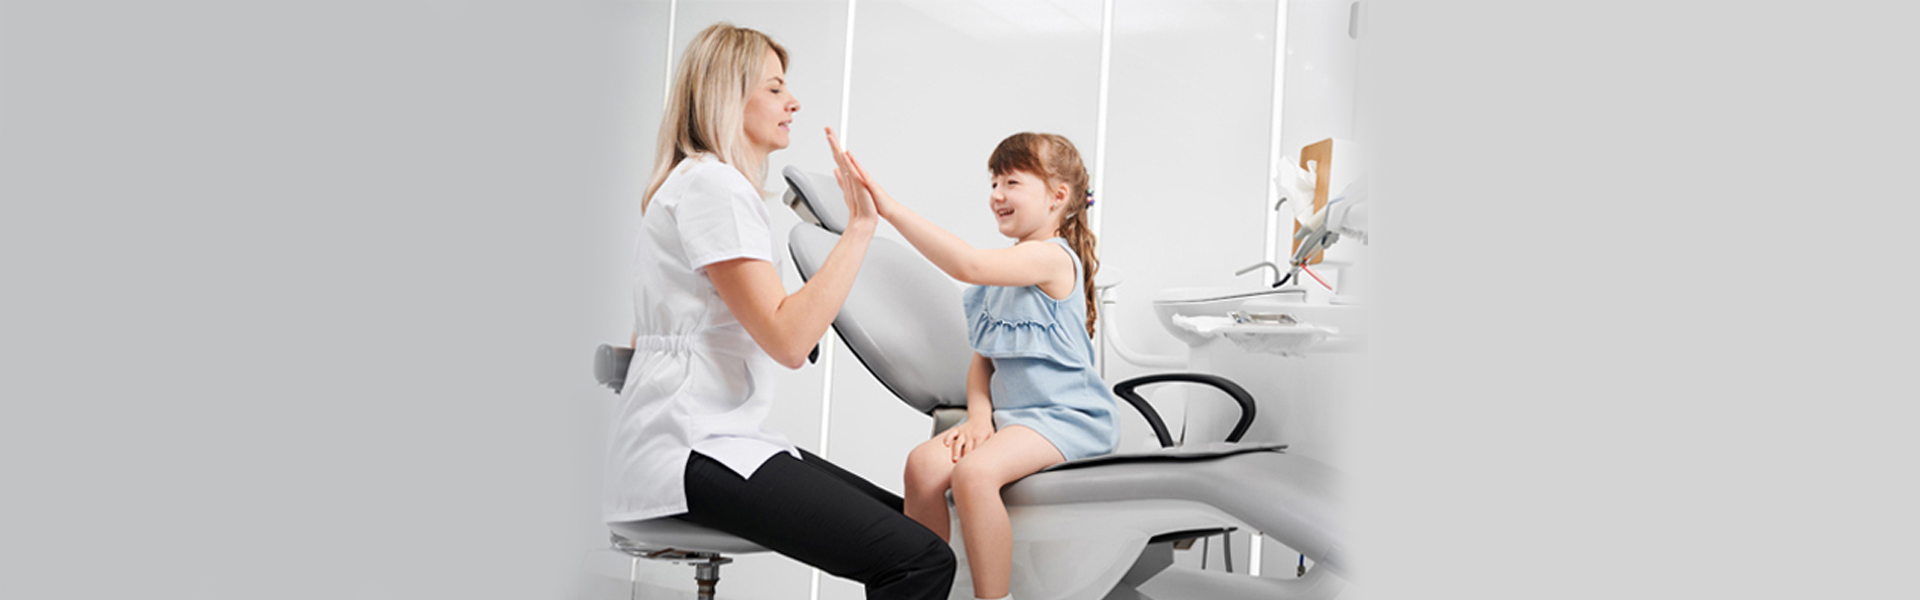 How to Find Top Pediatric Dentist Near Me